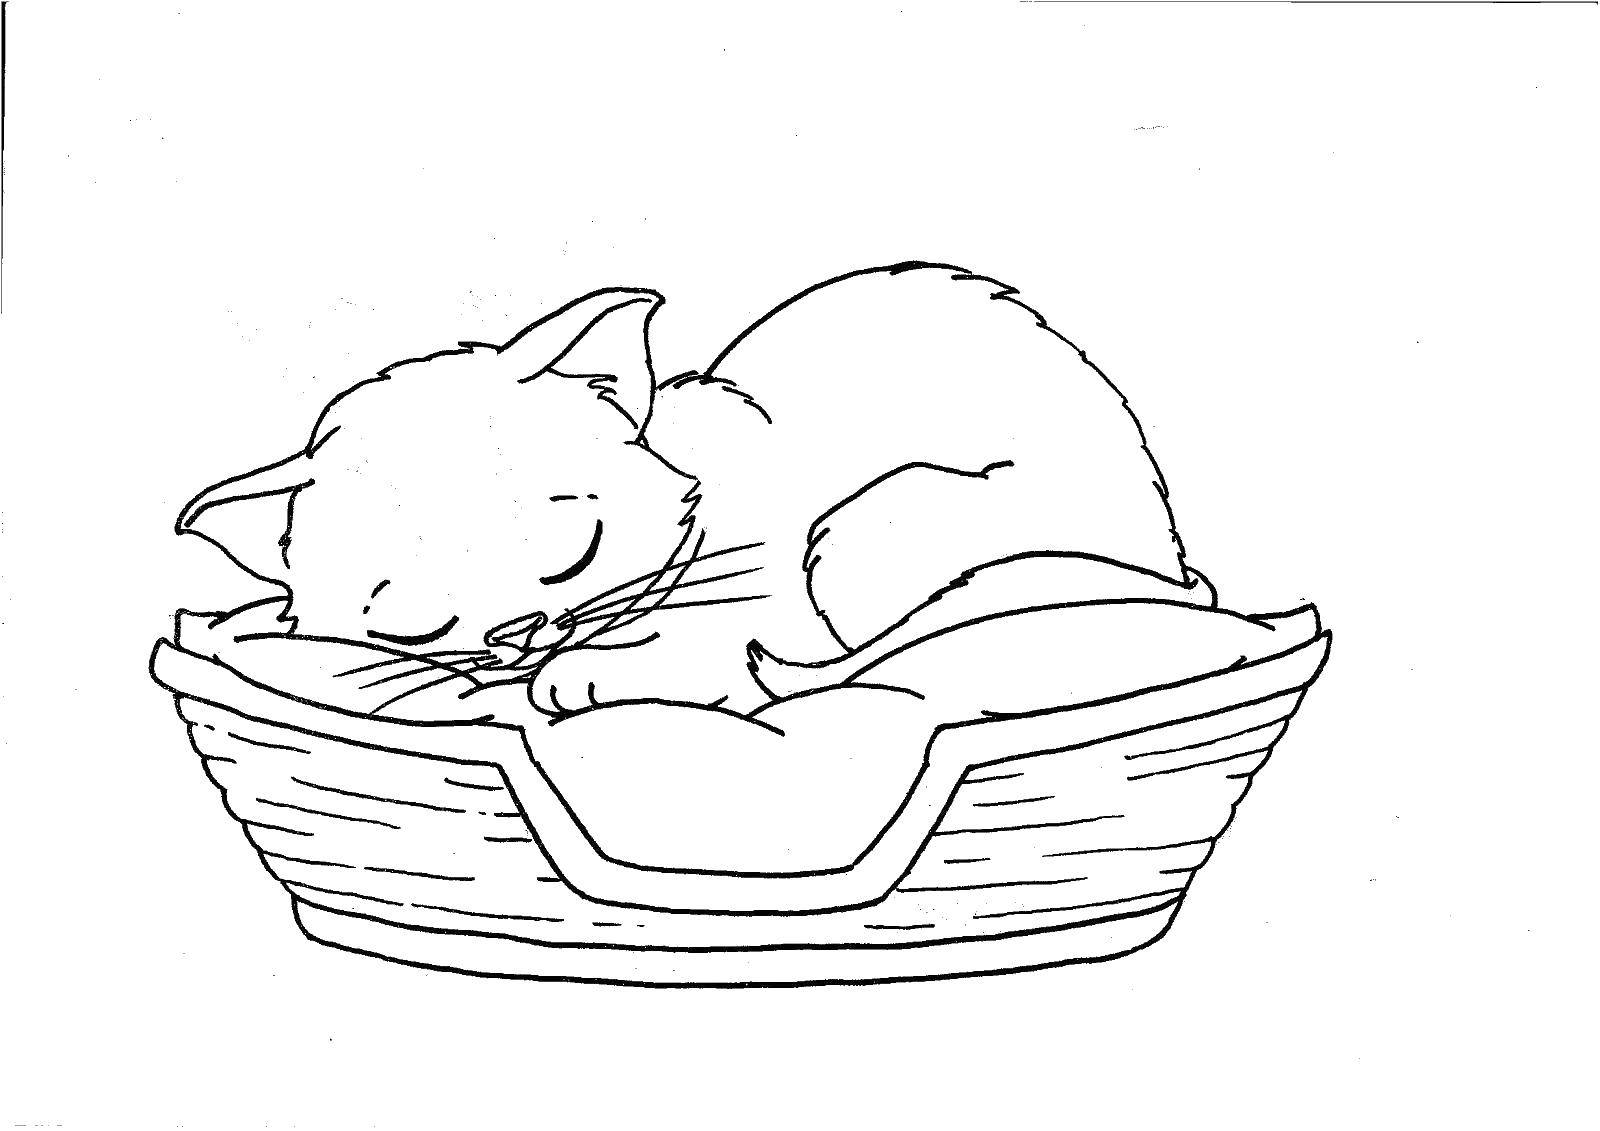 Coloring Sleeping kitty. Category Cats and kittens. Tags:  Animals, kitten.